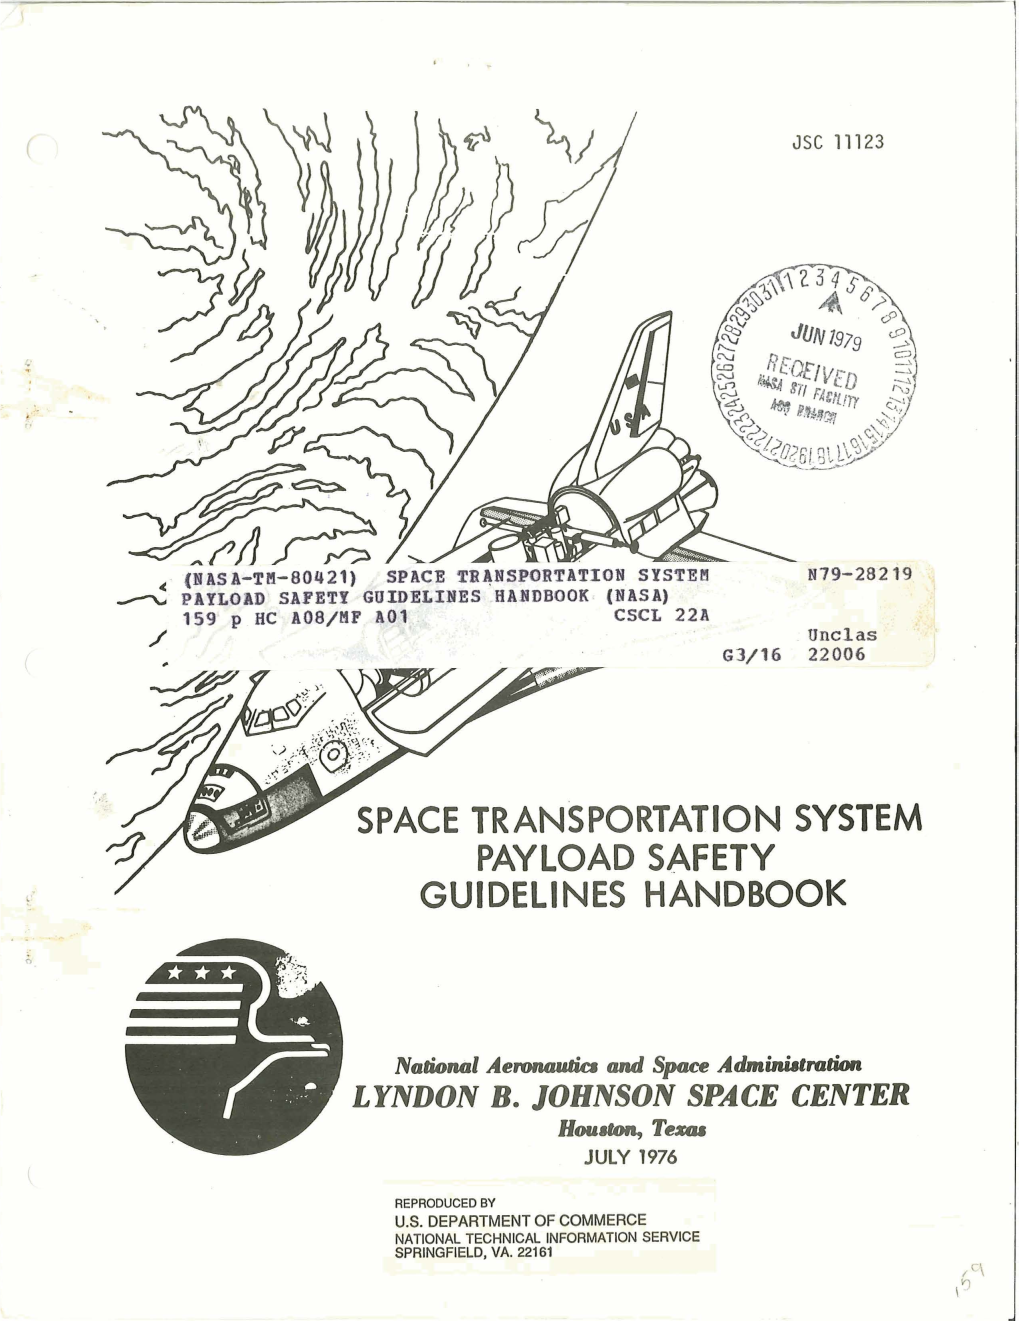 Space Transportation System Pay Load Safety Guidelines Handbook